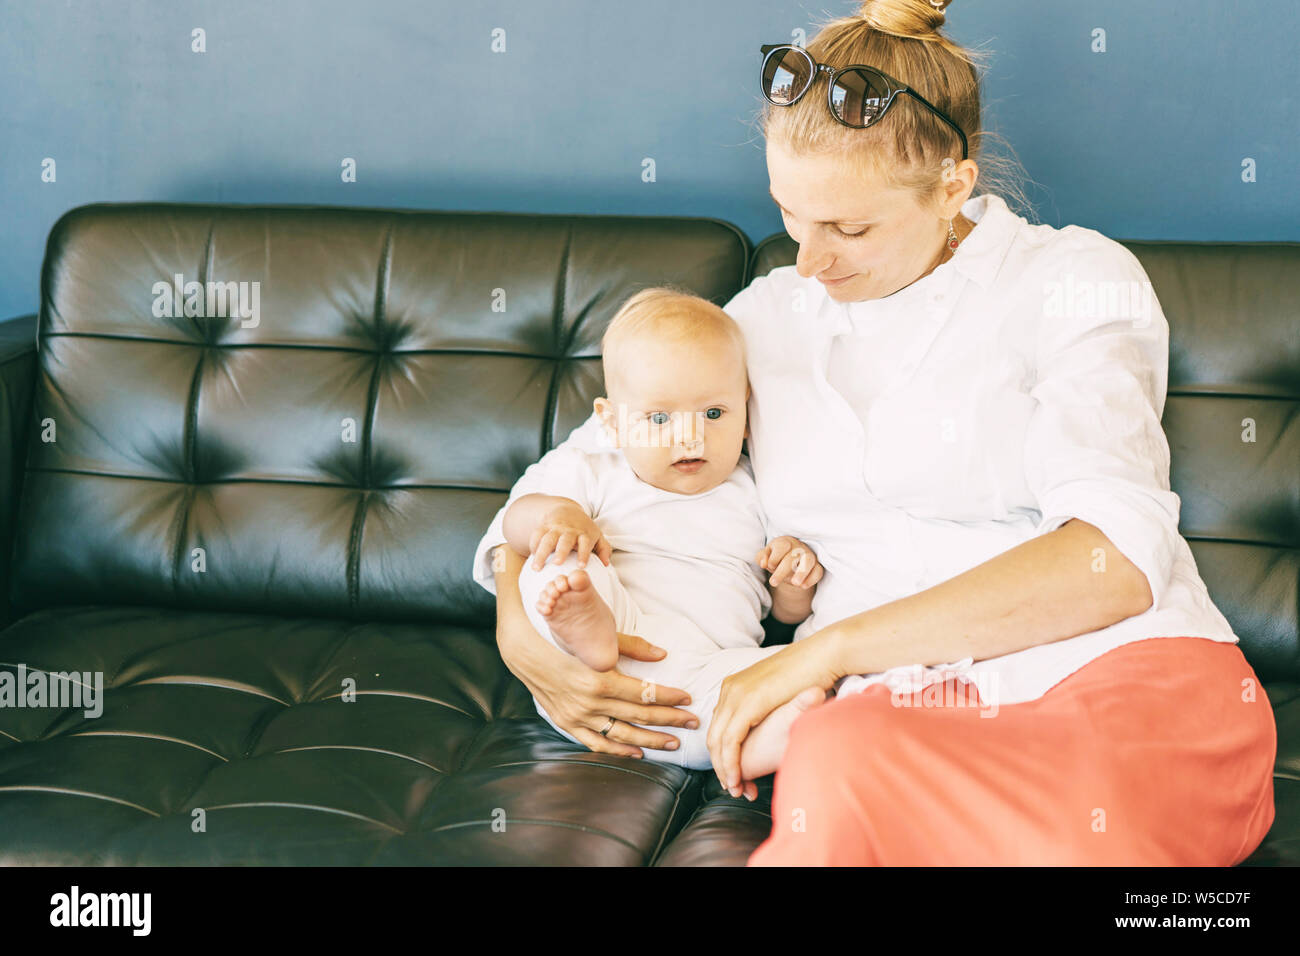 A young mother and a 6-month-old baby are sitting on a dark sofa. Stock Photo